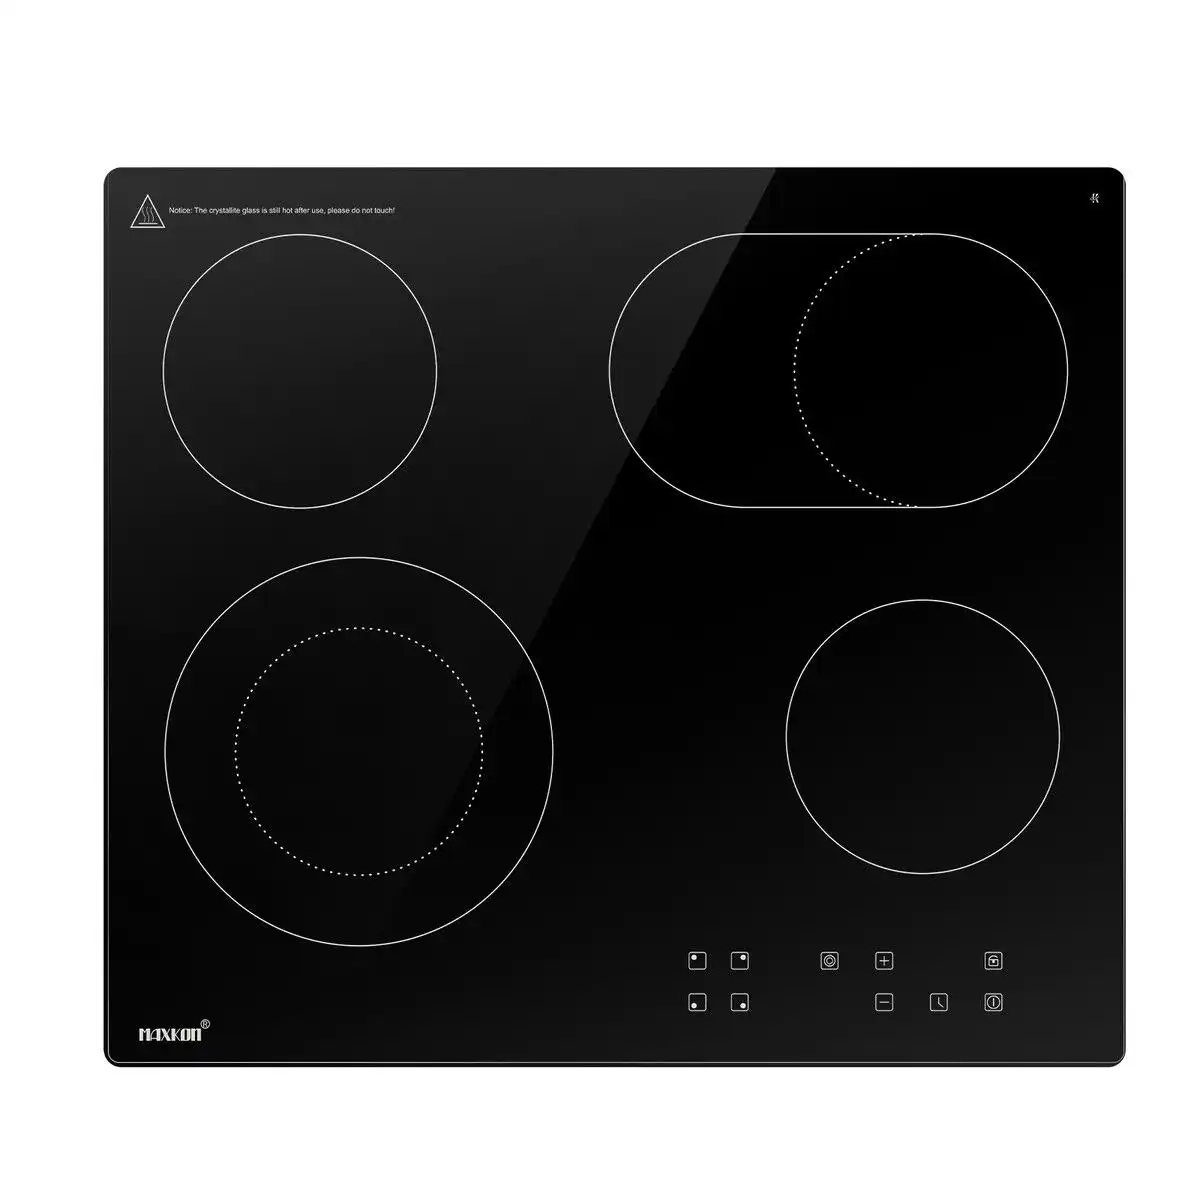 Maxkon Ceramic Cooktop Stove Electric Cooktop Hob Cooker Glass Top 4 Burners 6 Zones 60cm Touch Control Built In